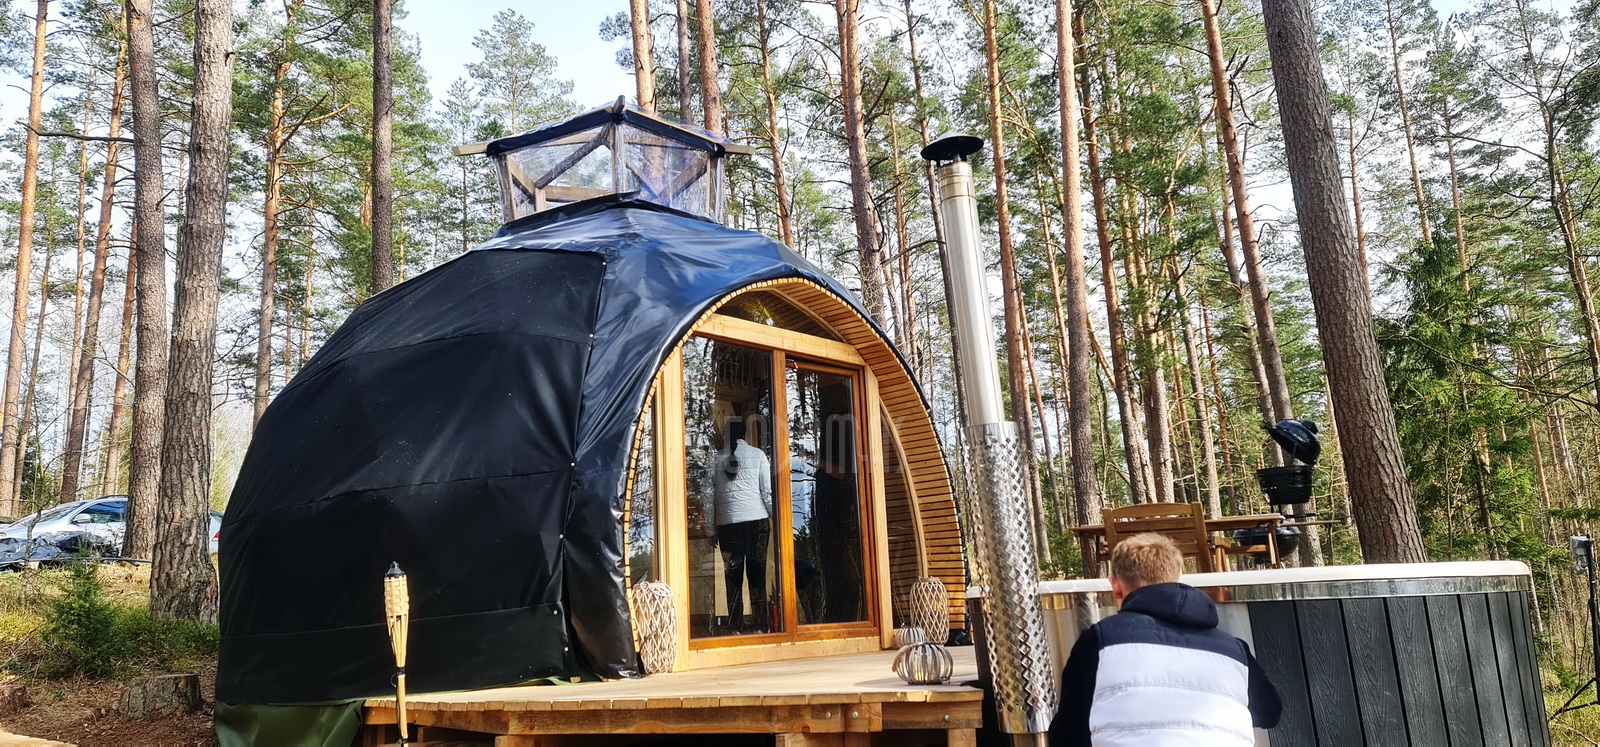 Connect with nature | Eco Living in forest | GLAMPINGLITHUANIA